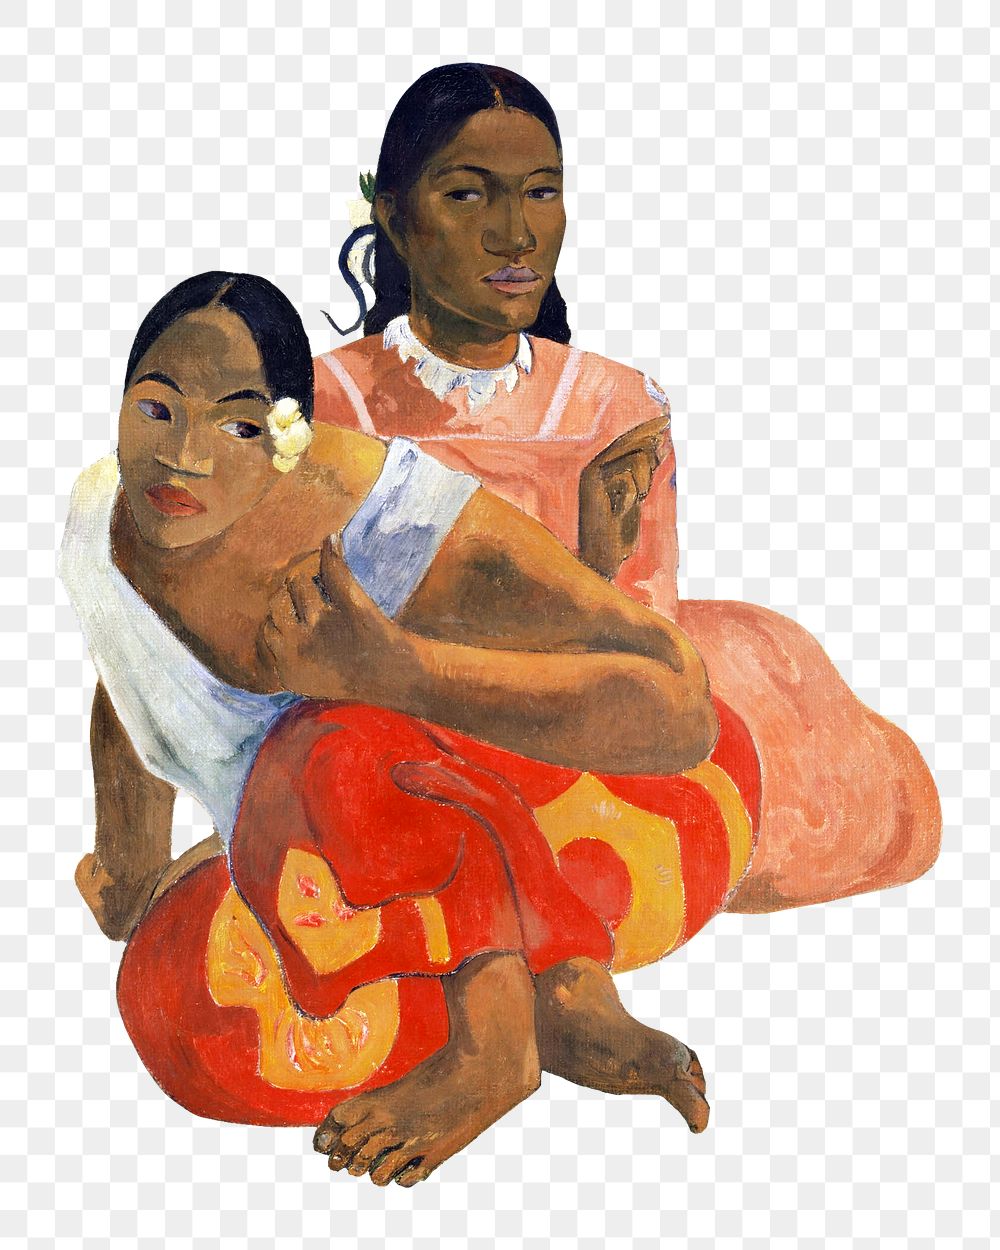 Woman png sticker, Gauguin-inspired artwork, transparent background, remixed by rawpixel